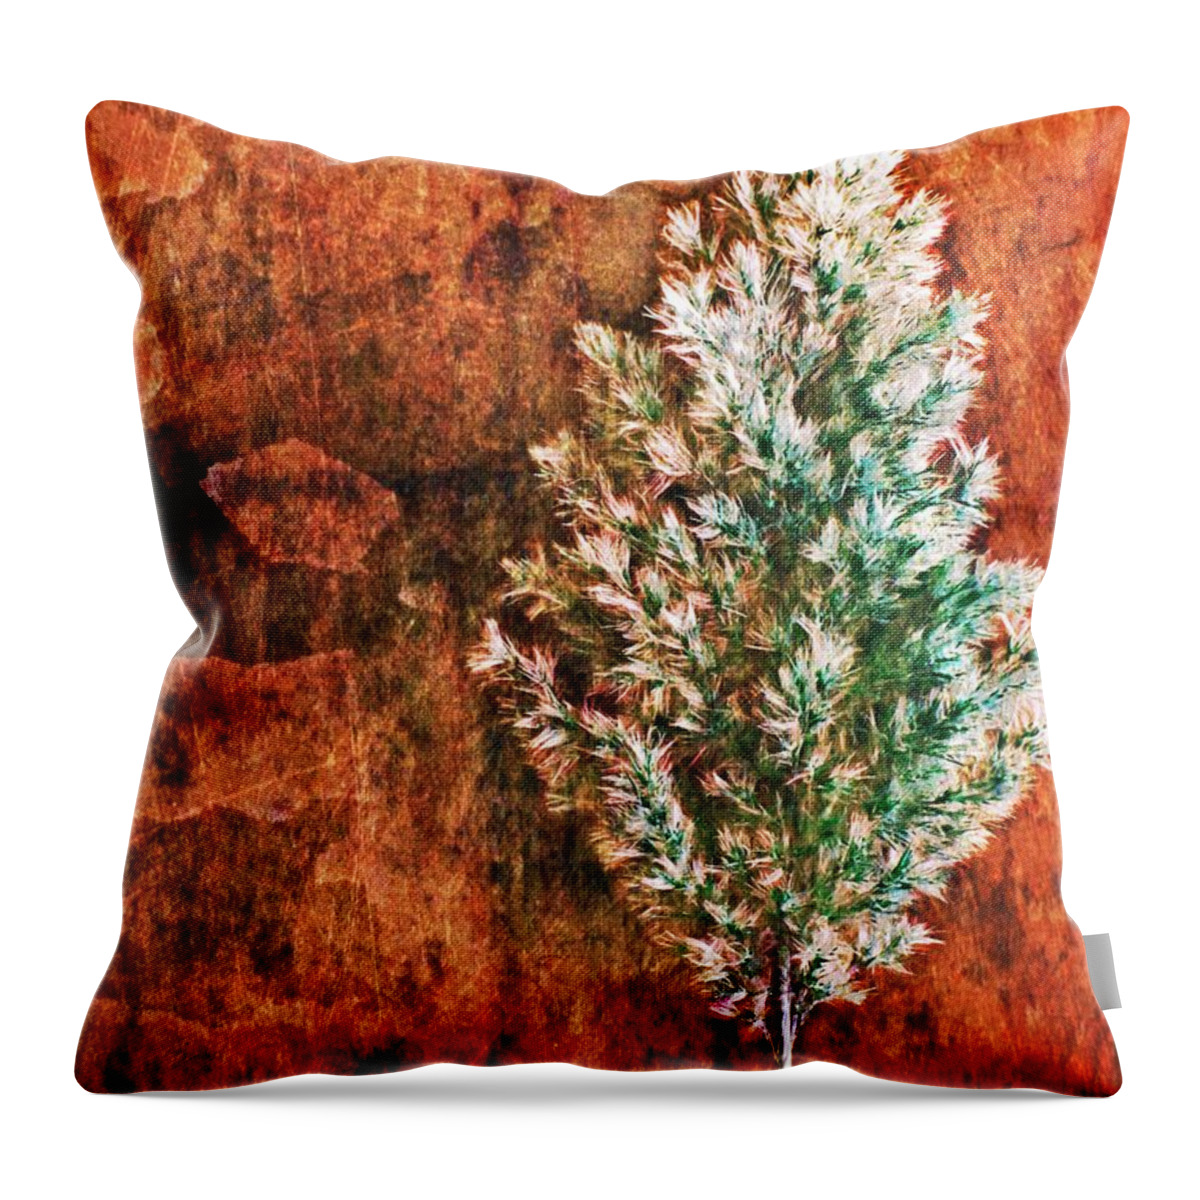 Nature Abstract Throw Pillow featuring the digital art Nature Abstract 48 by Maria Huntley